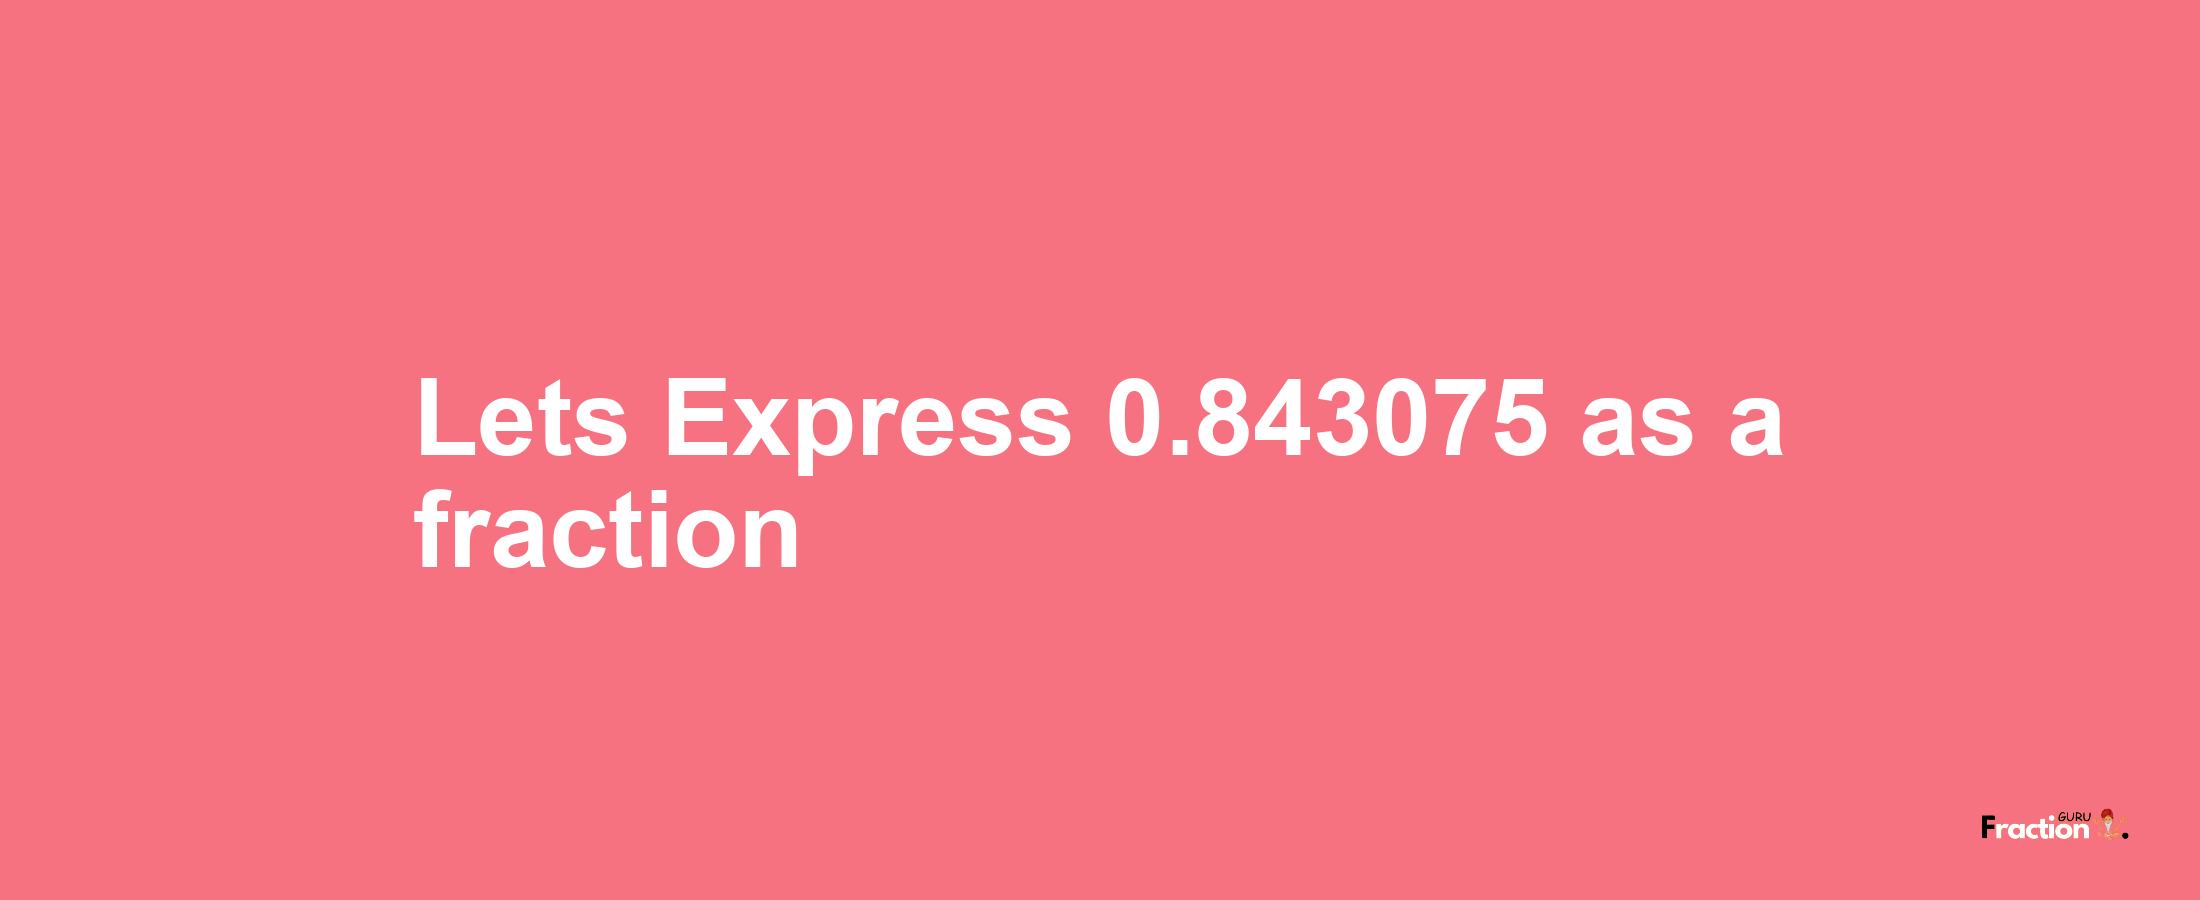 Lets Express 0.843075 as afraction